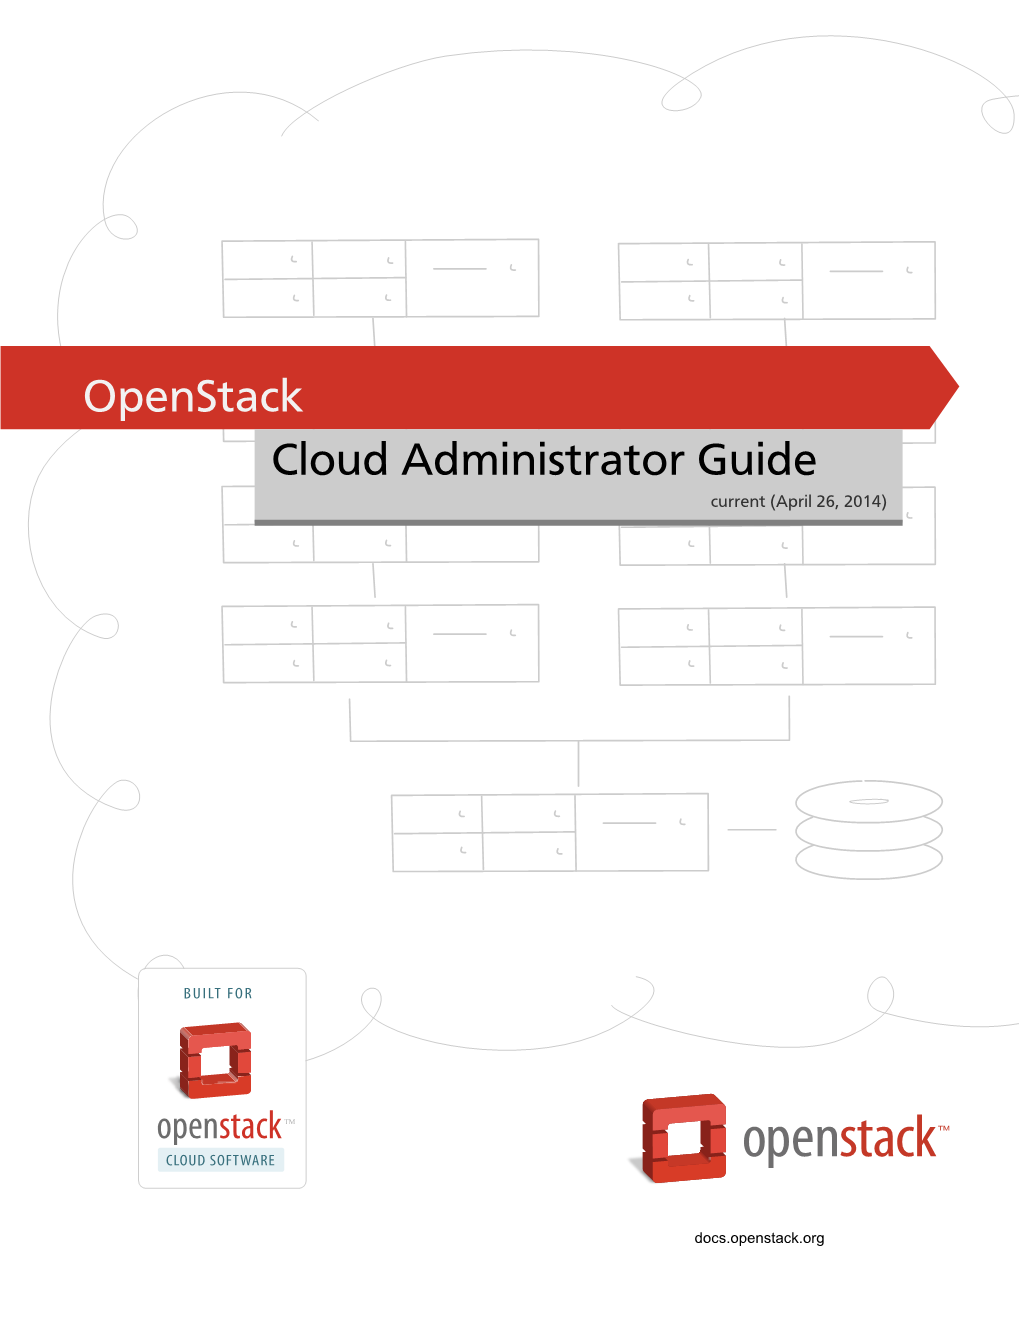 Openstack Cloud Administrator Guide Current (2014-04-26) Copyright © 2013, 2014 Openstack Foundation Some Rights Reserved